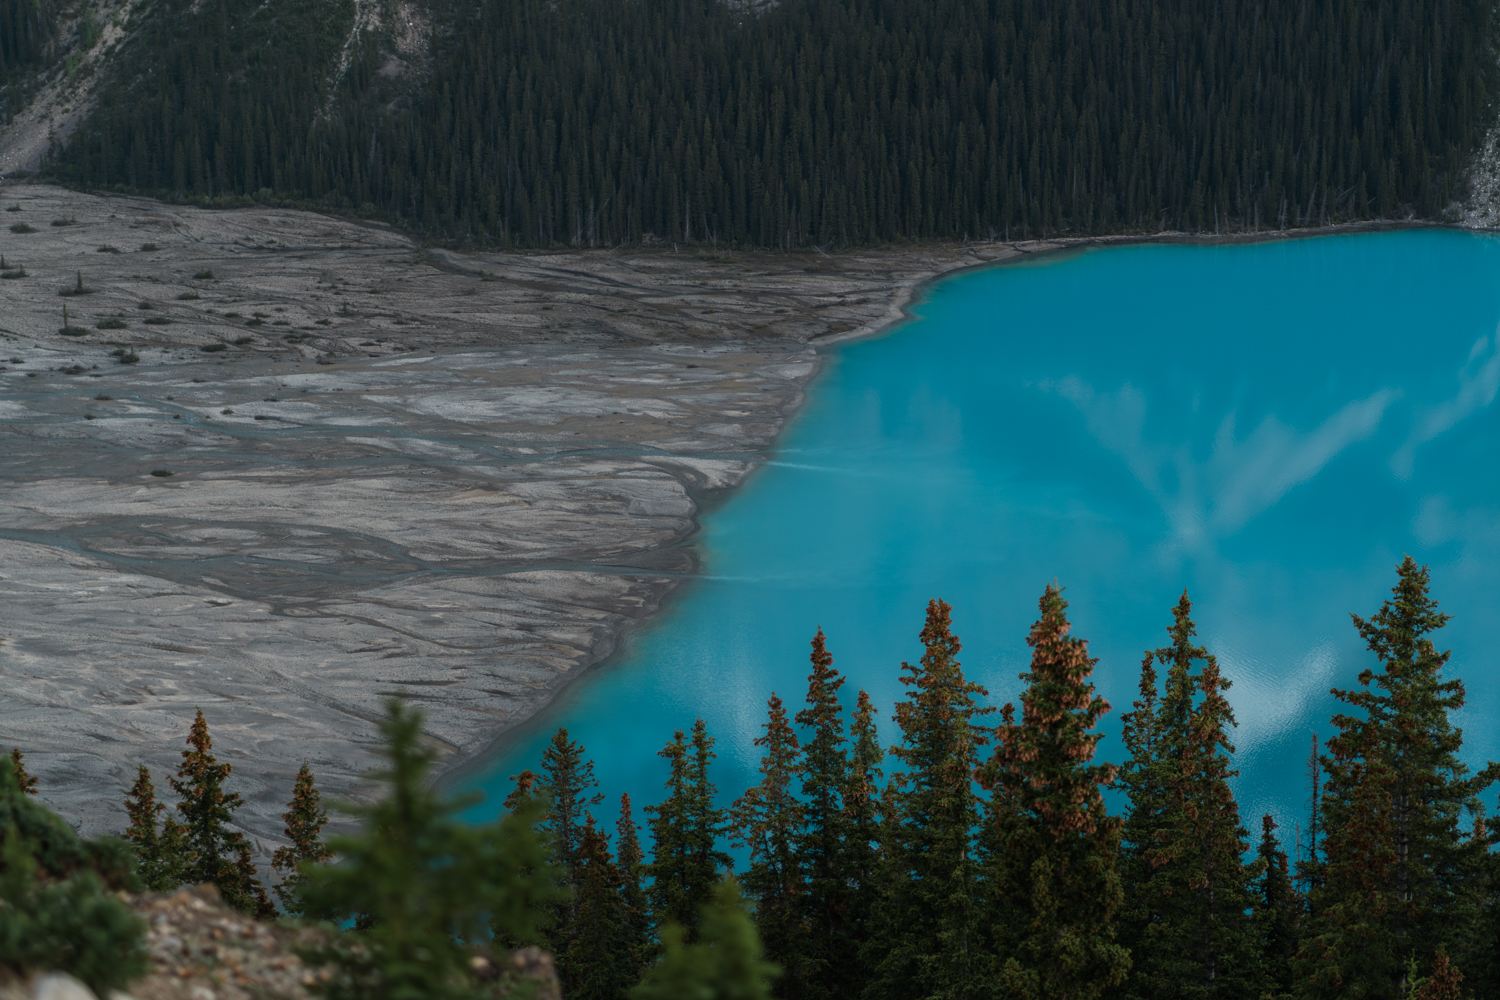 A close up of the glacier run off into the blue waters of Peyto Lake in Banff National Park